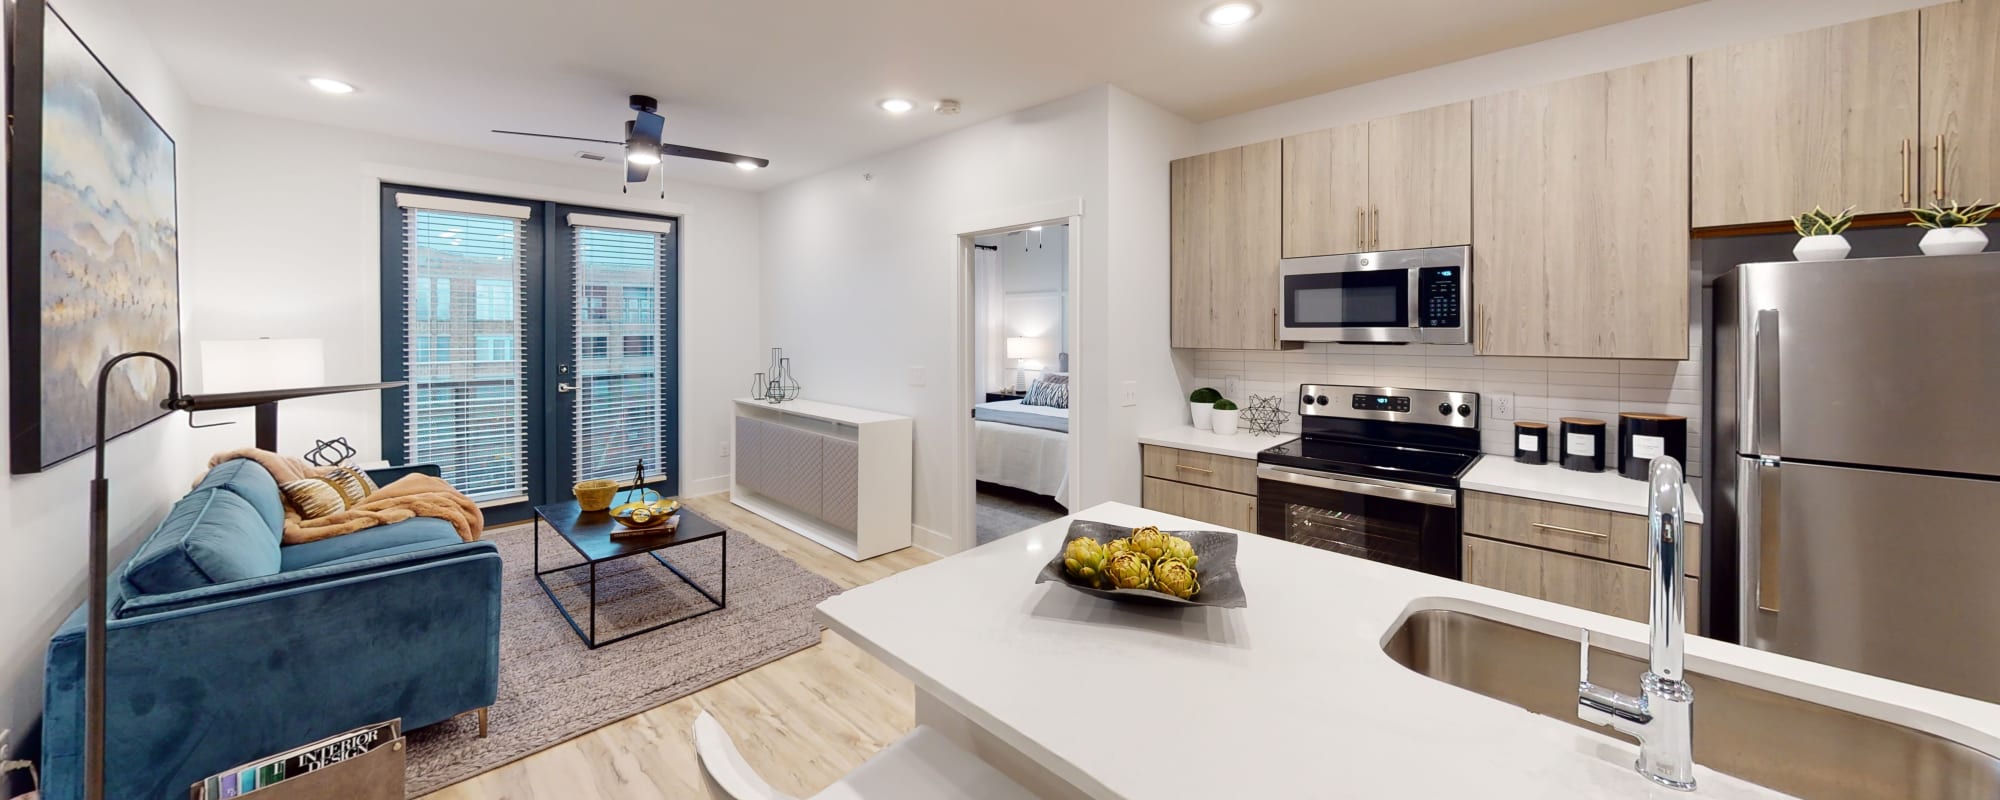 Kitchen & Living Room at Factory 52 Apartments | Brand-New Apartments in Norwood, OH